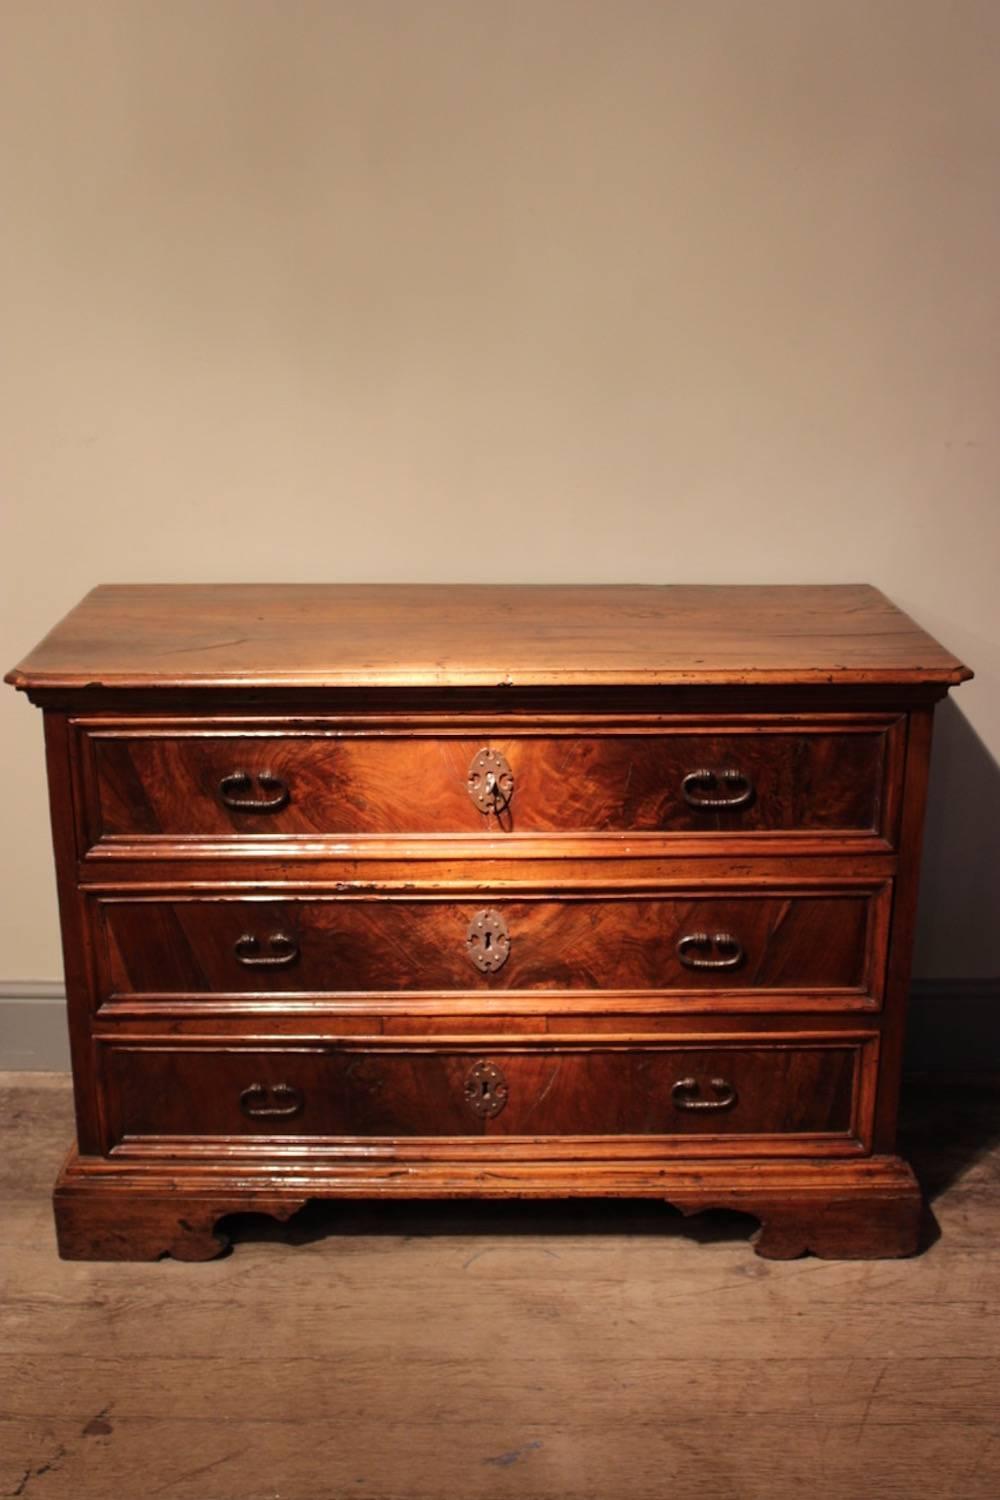 A substantial mid-18th century solid walnut and figured walnut veneered three drawer commode with the original iron handles, escutcheons and over-scaled bracket feet, probably Tuscan, circa 1750.